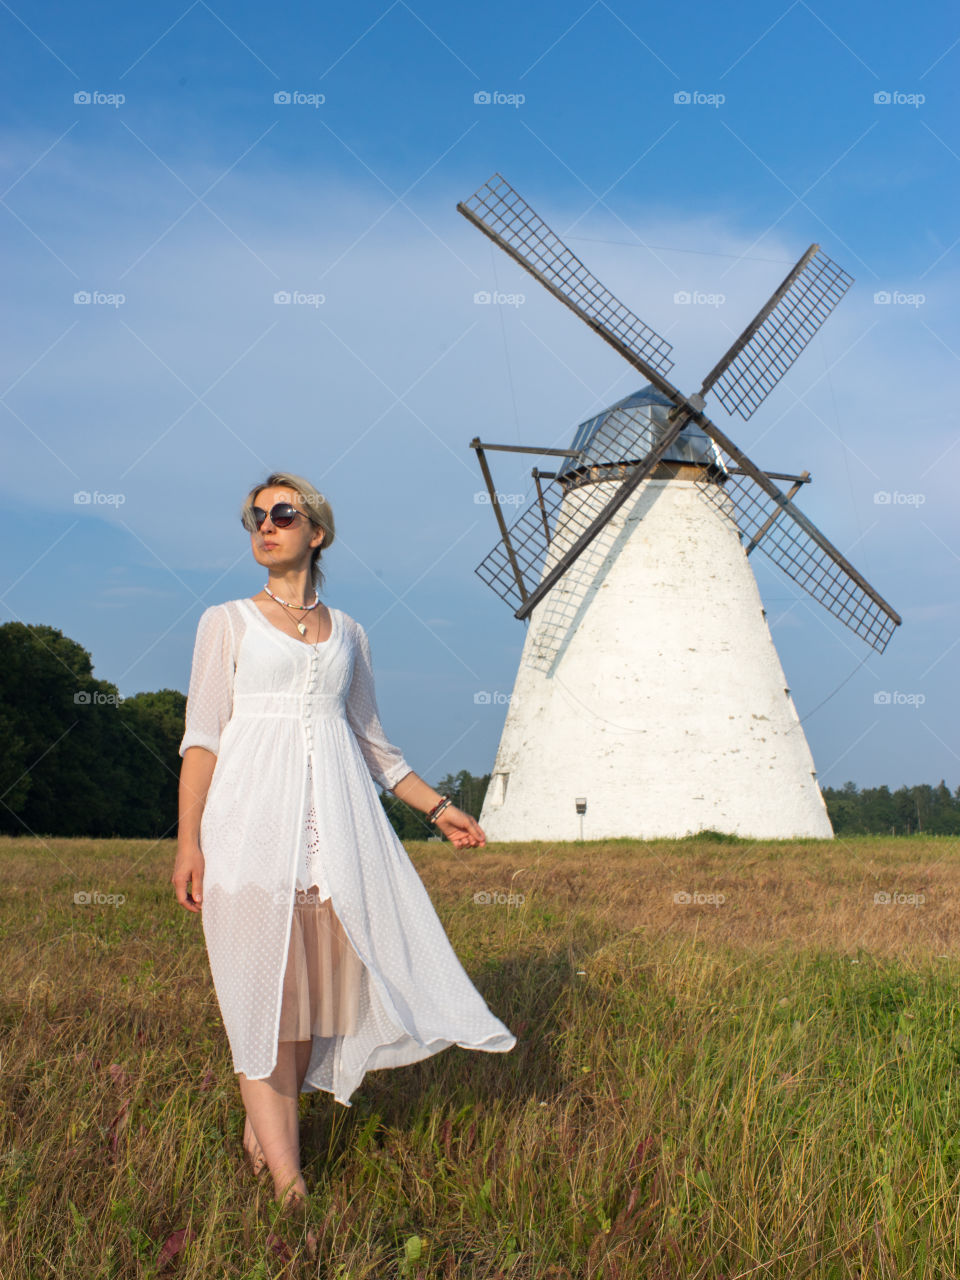 Fashionable woman standing against windmill